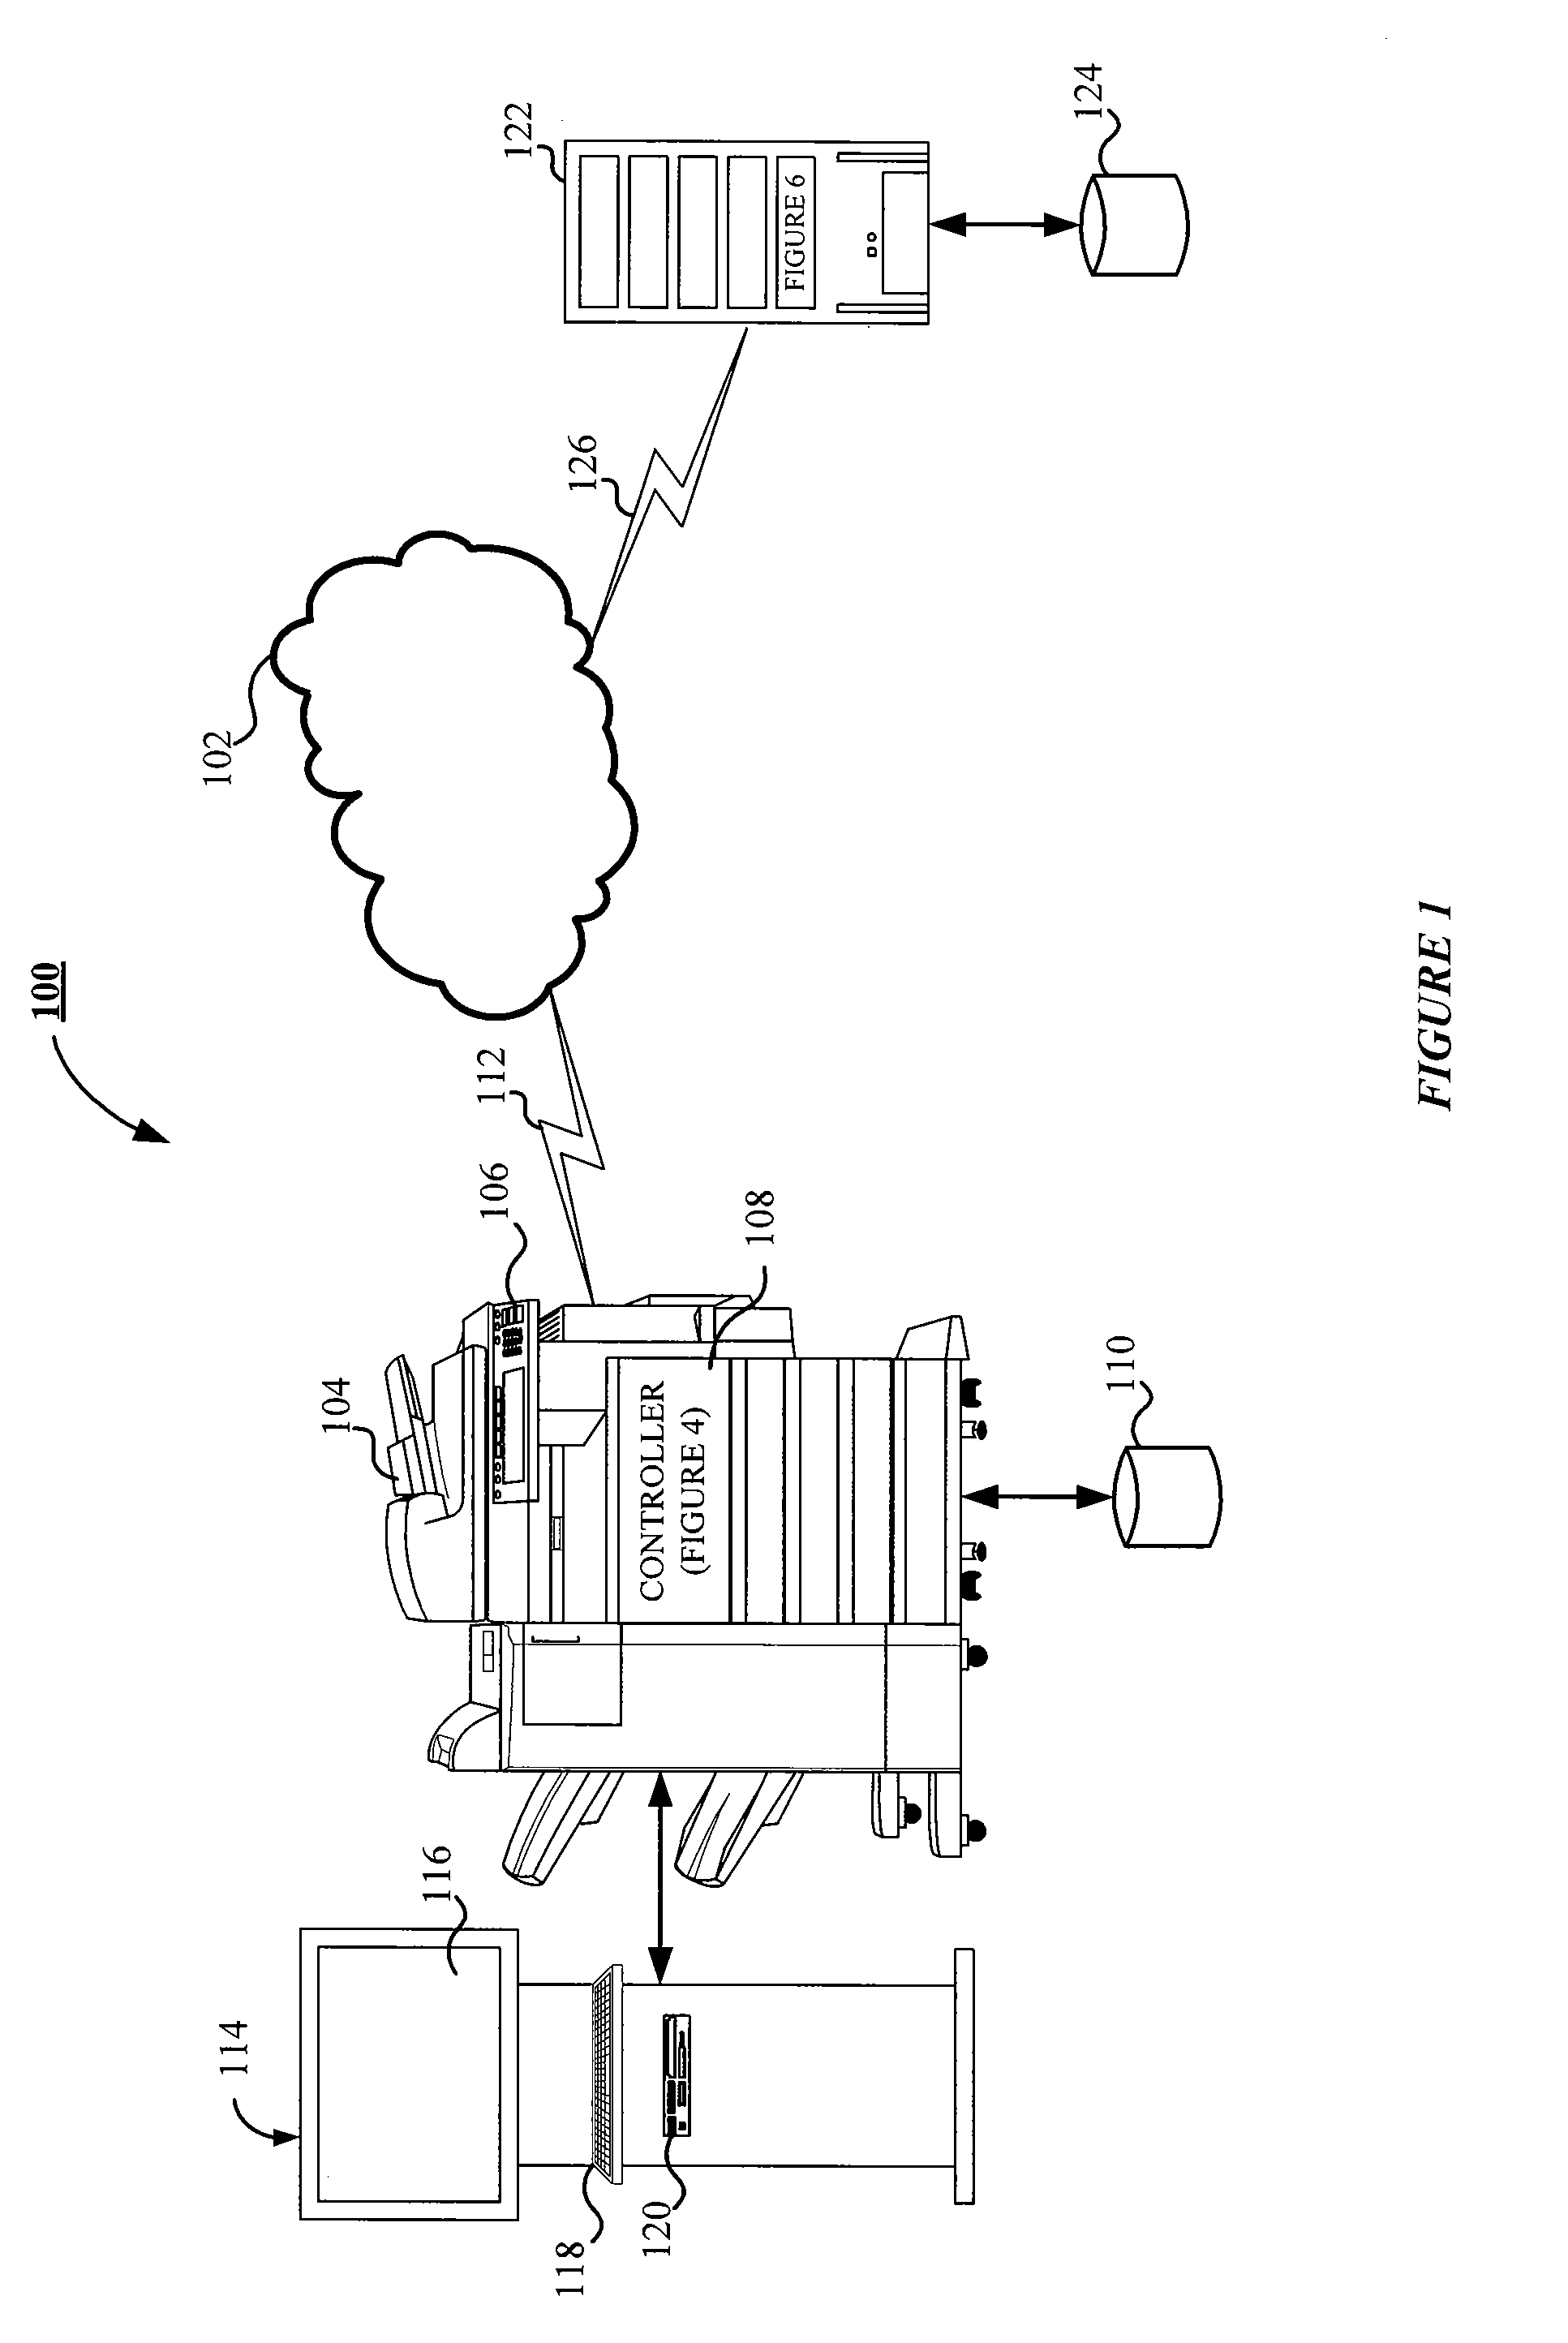 System and method for type-ahead address lookup employing historically weighted address placement